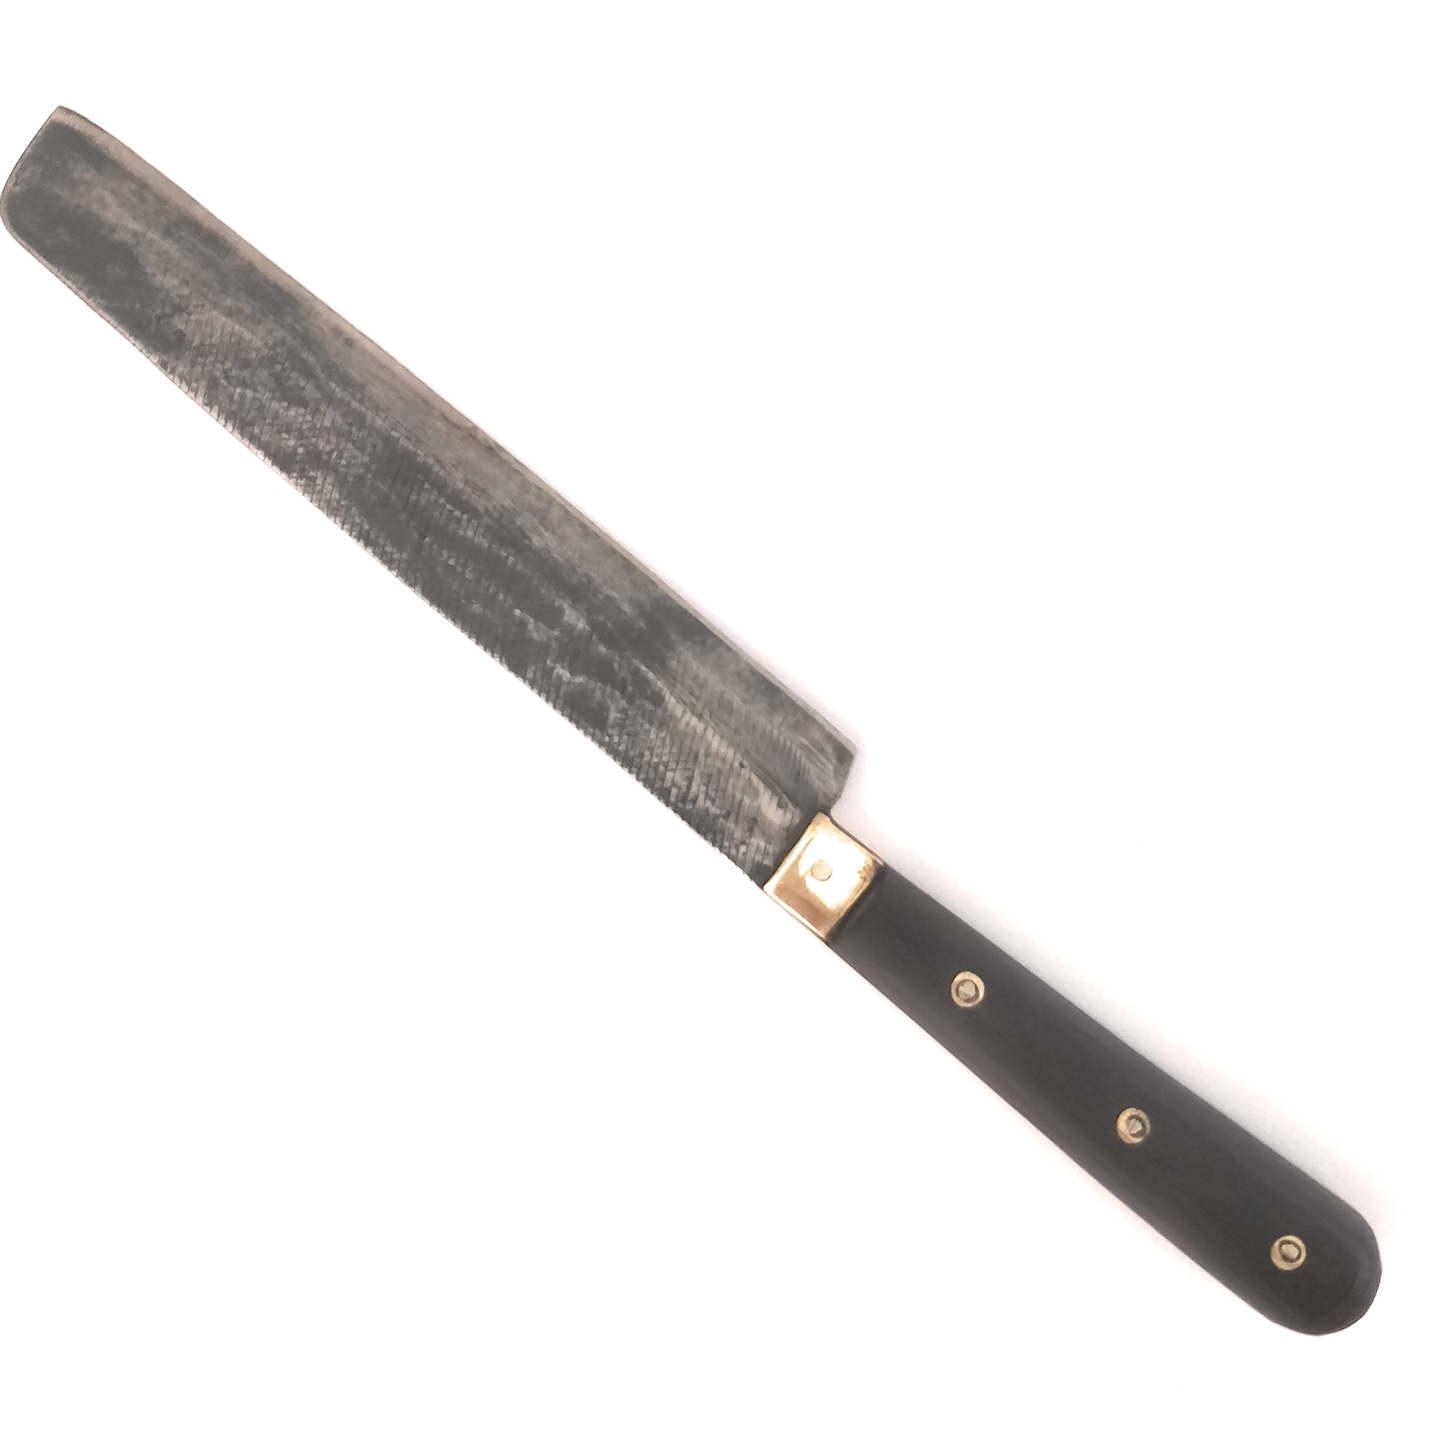 31 cm hand crafted Meat knife5 mm thick